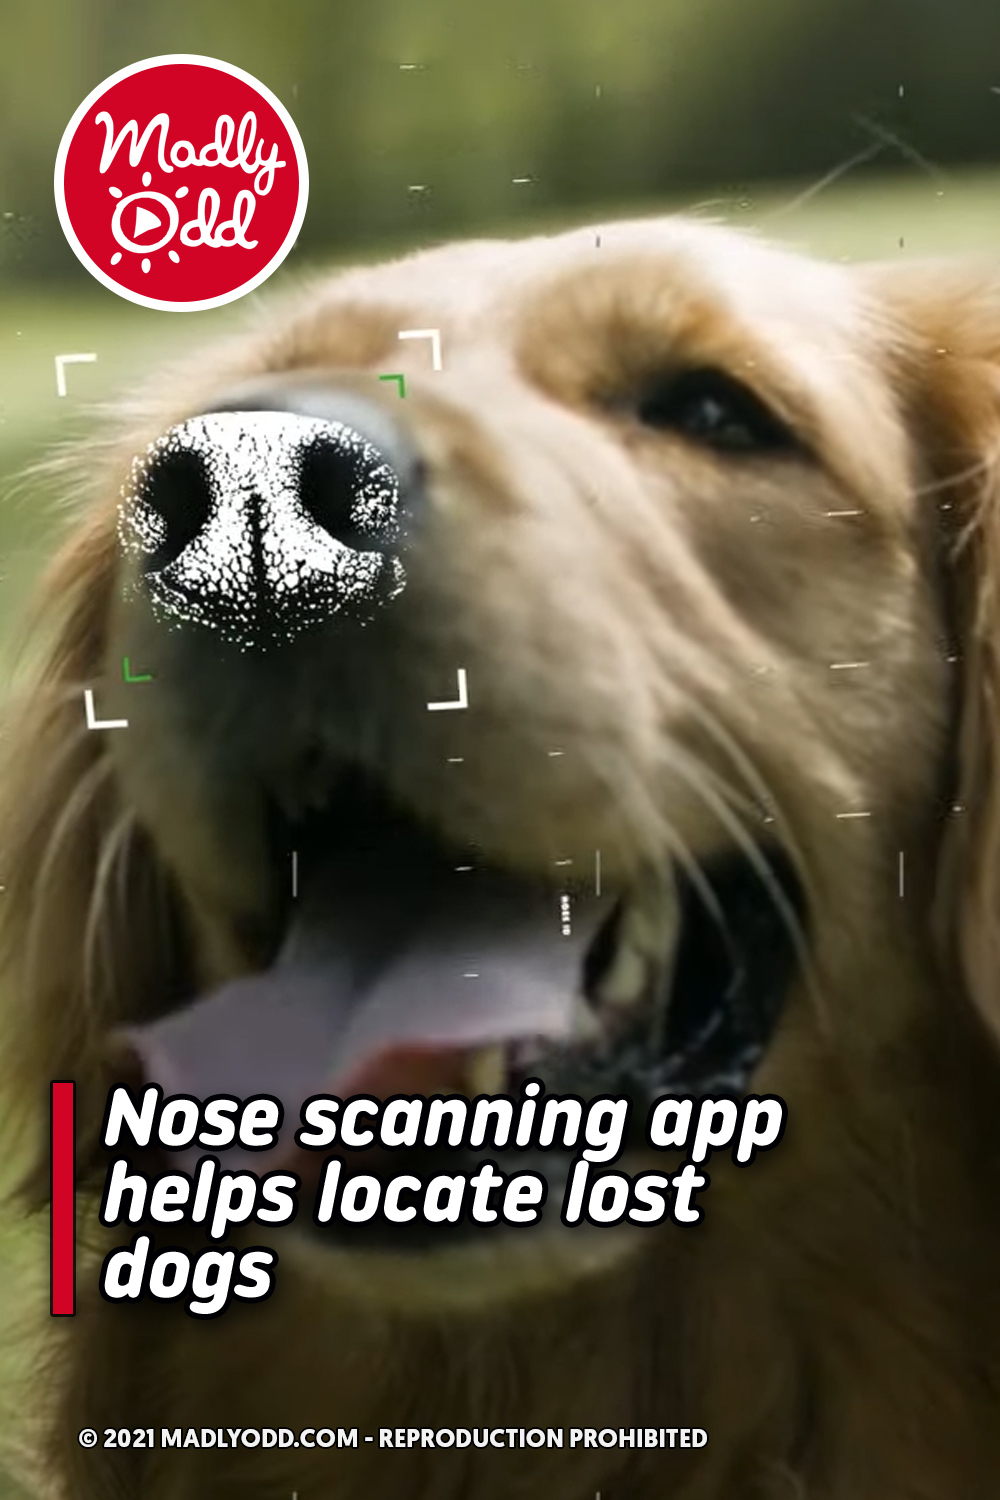 Nose scanning app helps locate lost dogs